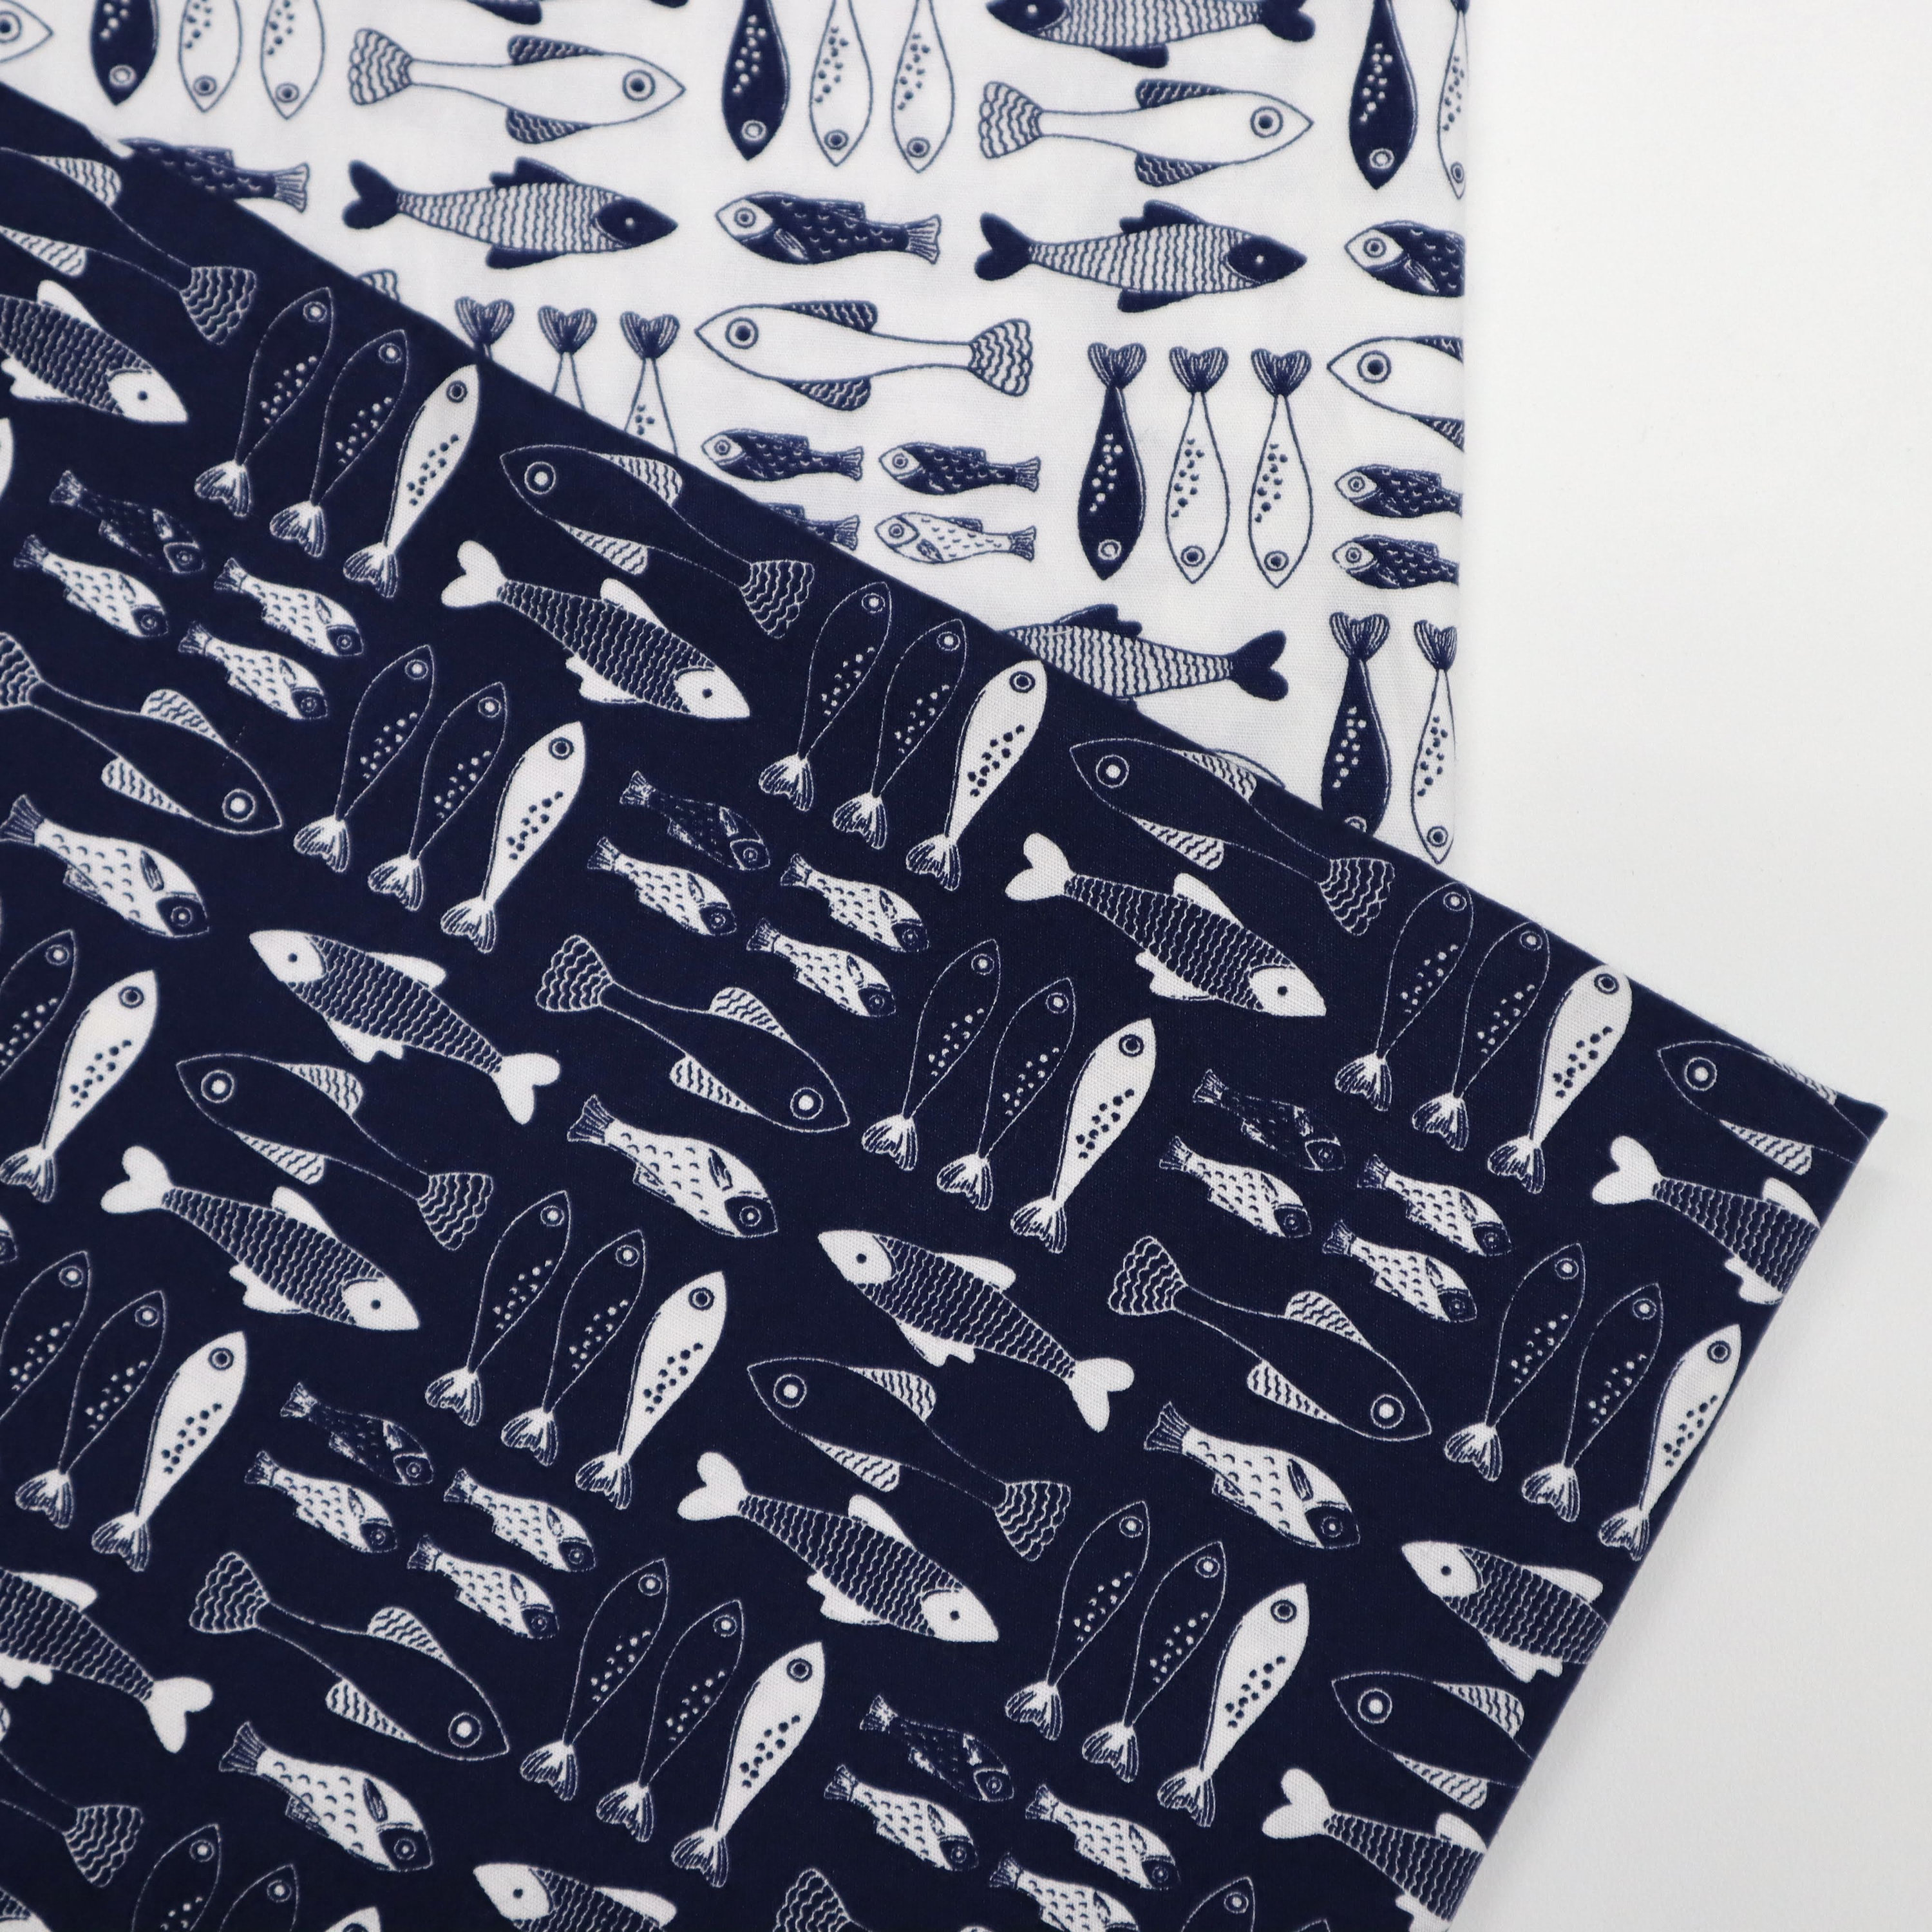 Little Fish Printed Cotton Fabric Fish Print on Navy Blue,white Background  Fabric, Cute Fish Cotton Fabric, Quilting Fabric by the Yard -  Canada